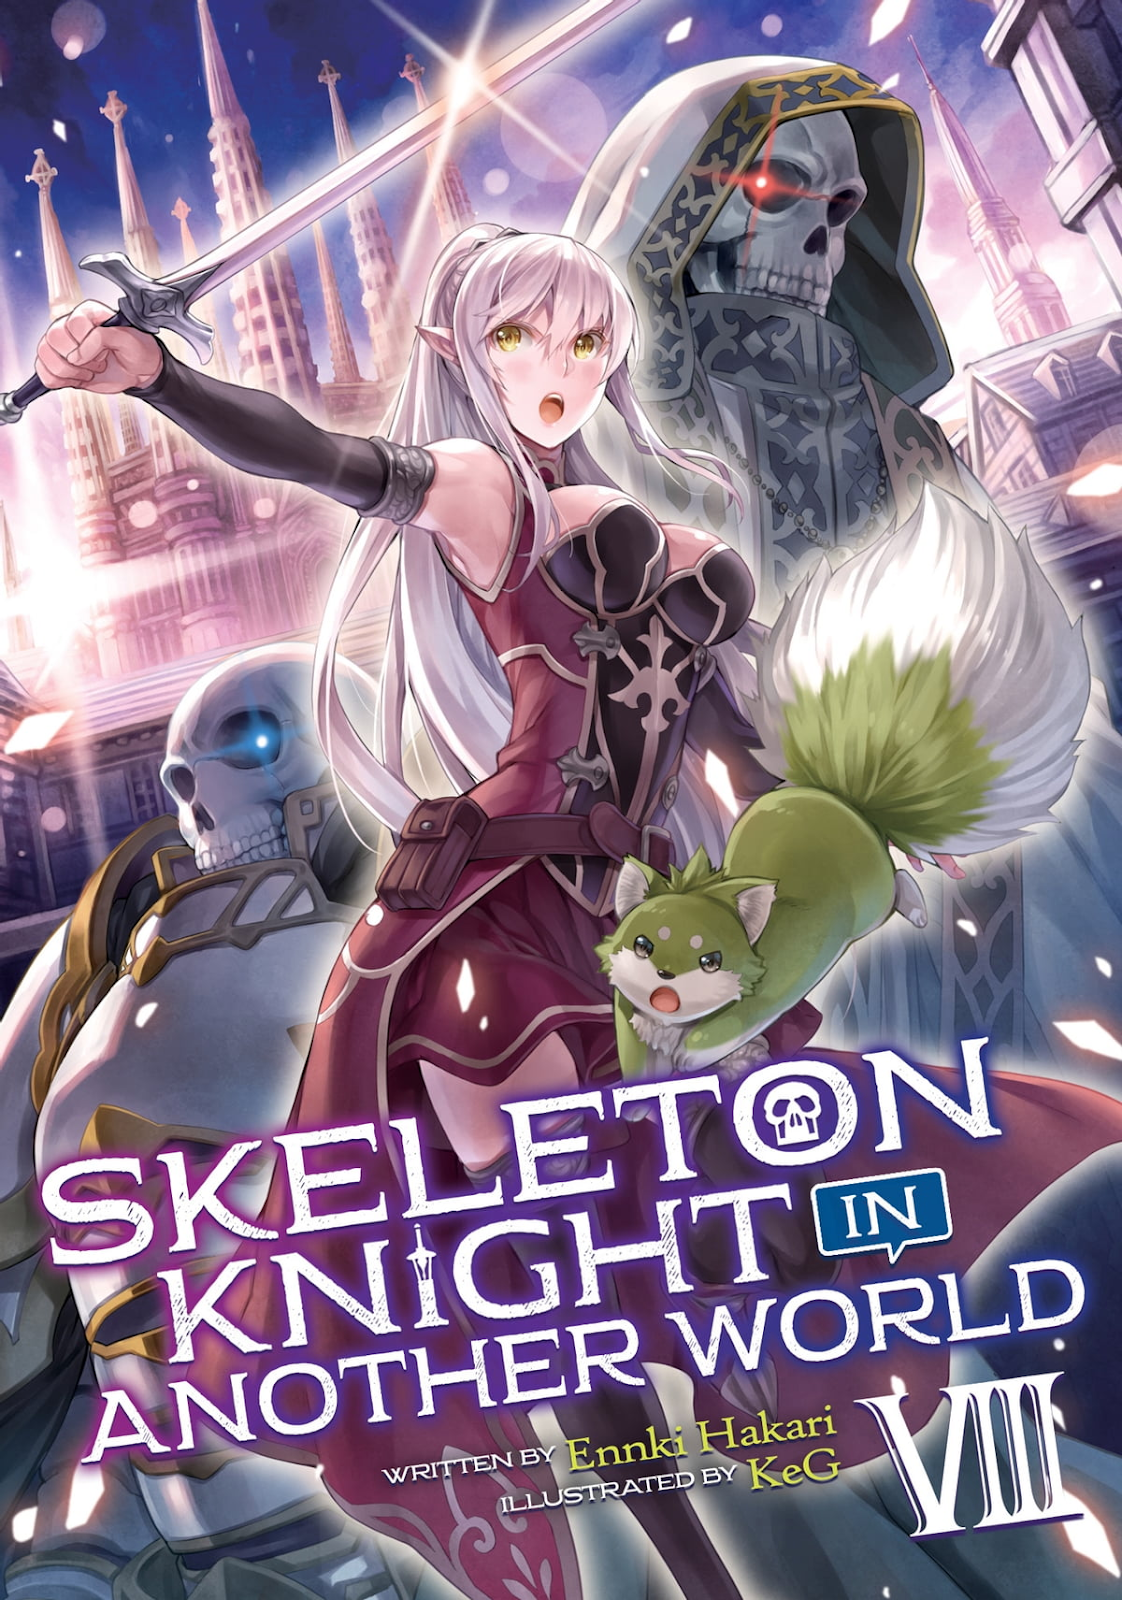 Skeleton Knight in Another World Shares New Anime Visual Featuring Arc,  Ariane, & Chiyome